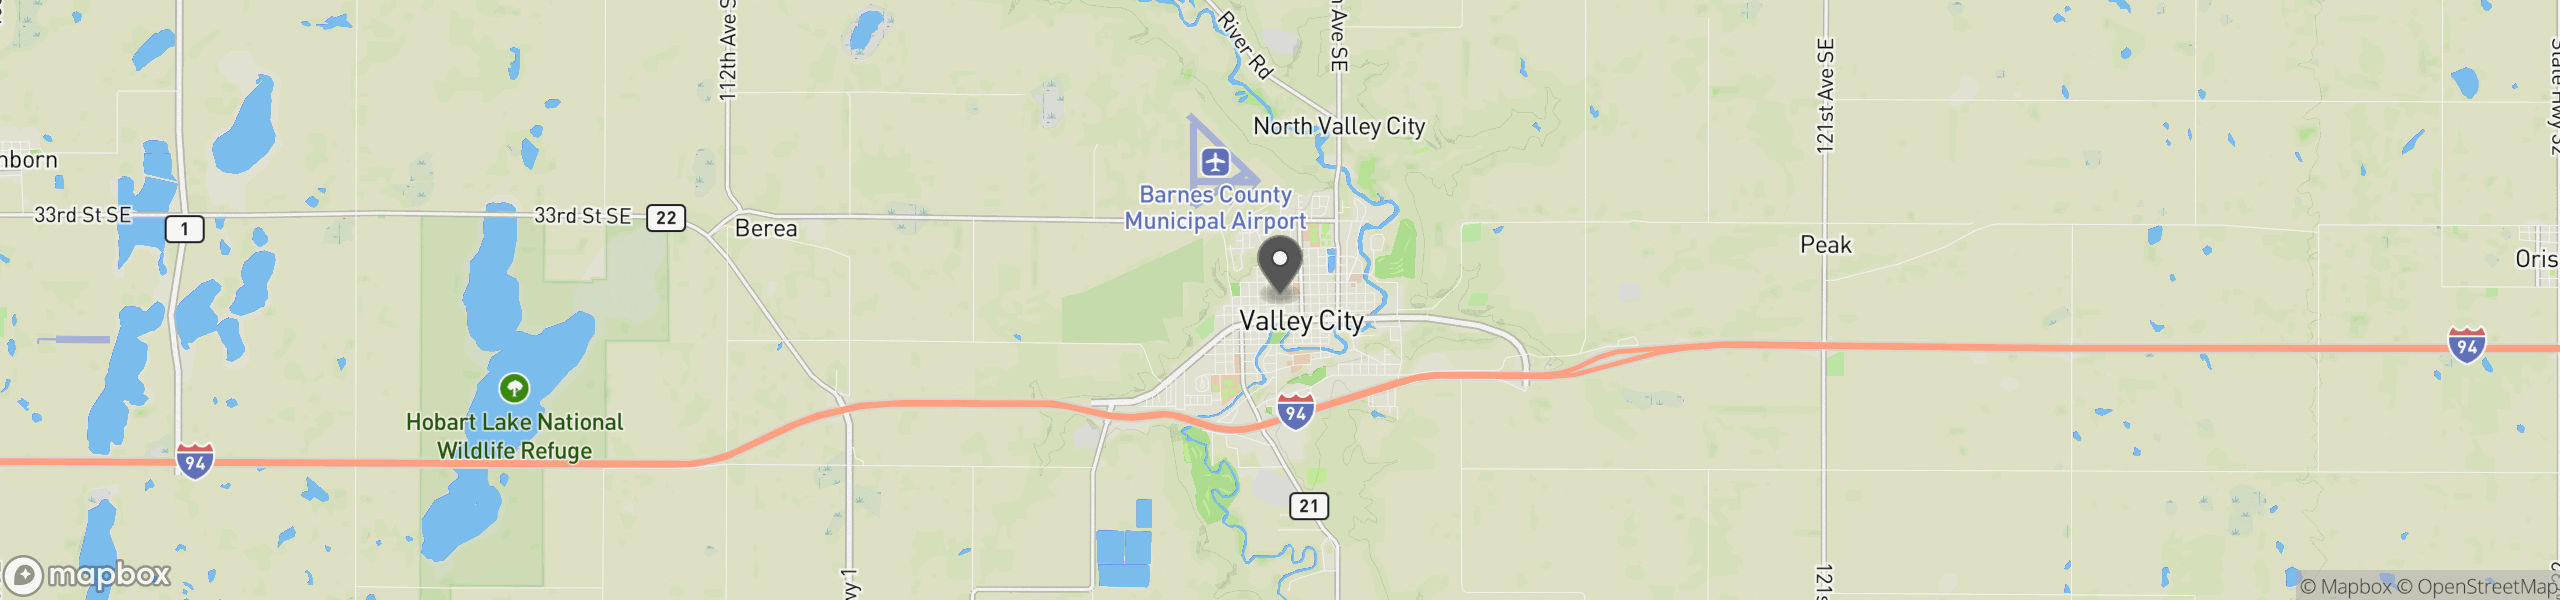 Valley City, ND